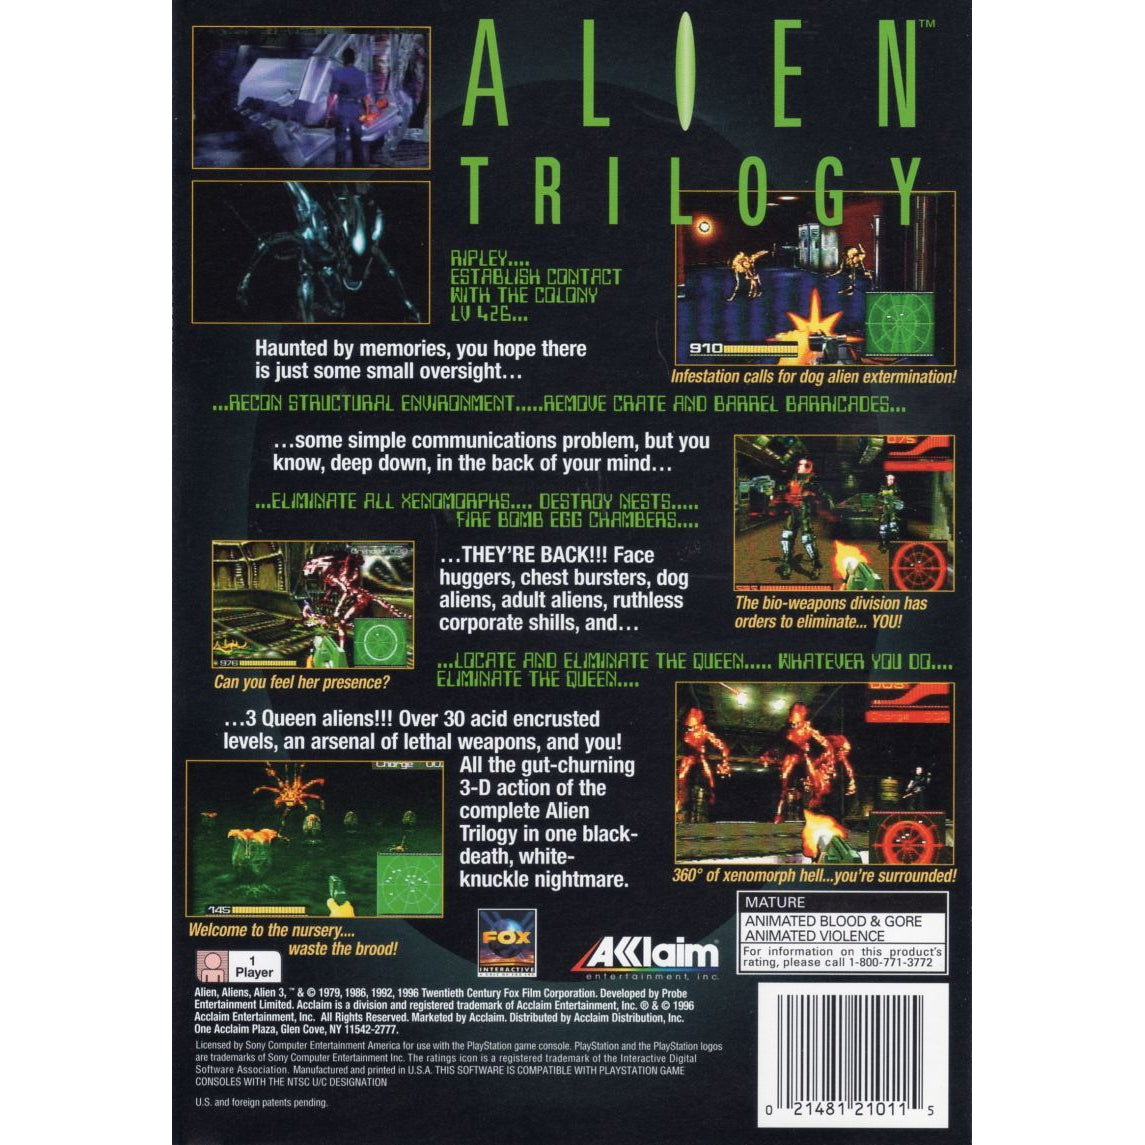 Alien Trilogy (Long Box) - PlayStation 1 (PS1) Game Complete - YourGamingShop.com - Buy, Sell, Trade Video Games Online. 120 Day Warranty. Satisfaction Guaranteed.